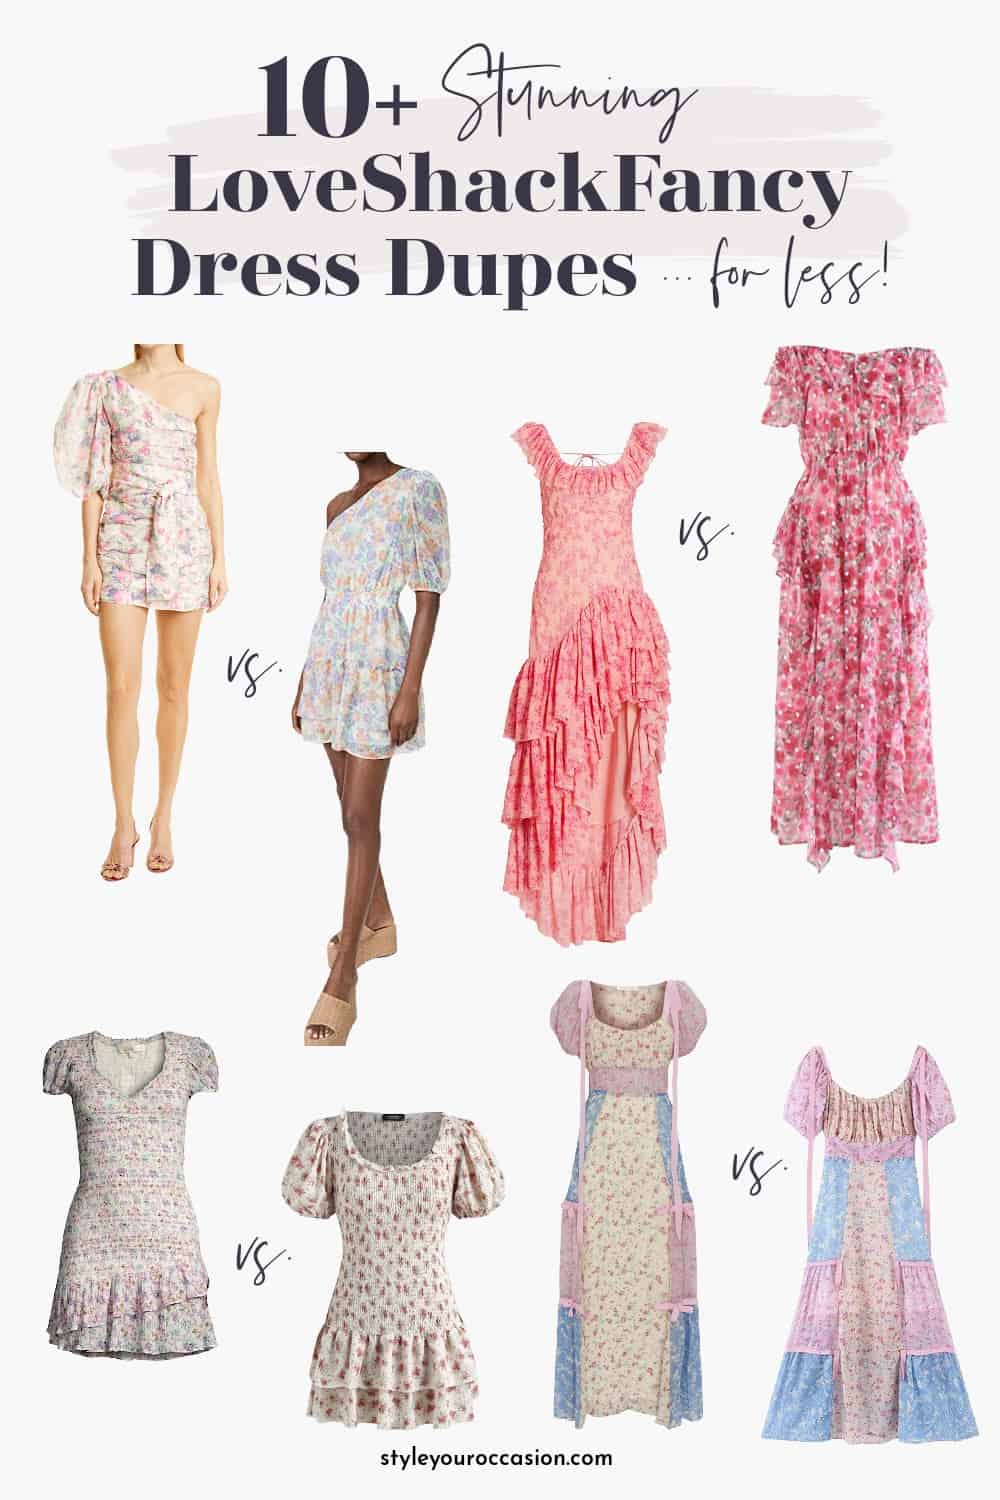 10+ Stunning Love Shack Fancy Dupes You'll Adore! (dress dupes)